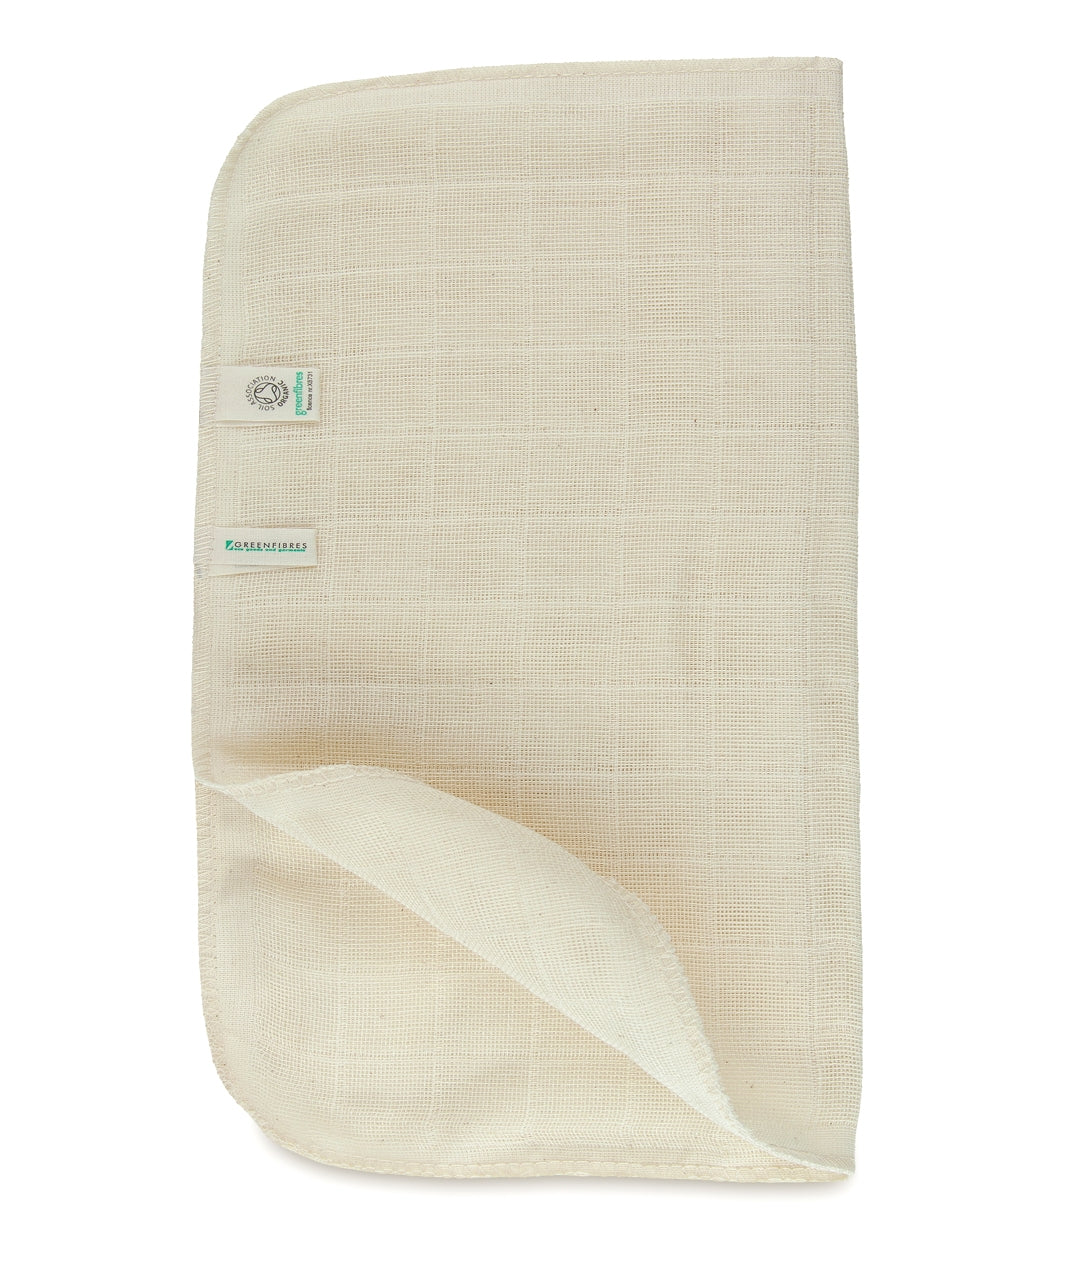 Organic Cotton &amp; Muslin Face Cloth (25cm x 25cm) | Greenfibres | Raw Living UK | House &amp; Home | Bath &amp; Shower | Beauty | Greenfibres Organic Brushed Cotton Muslin Cloth (25cm x 25cm): perfect for cleansing and exfoliating the face, or taking off masks and other facial treatments.